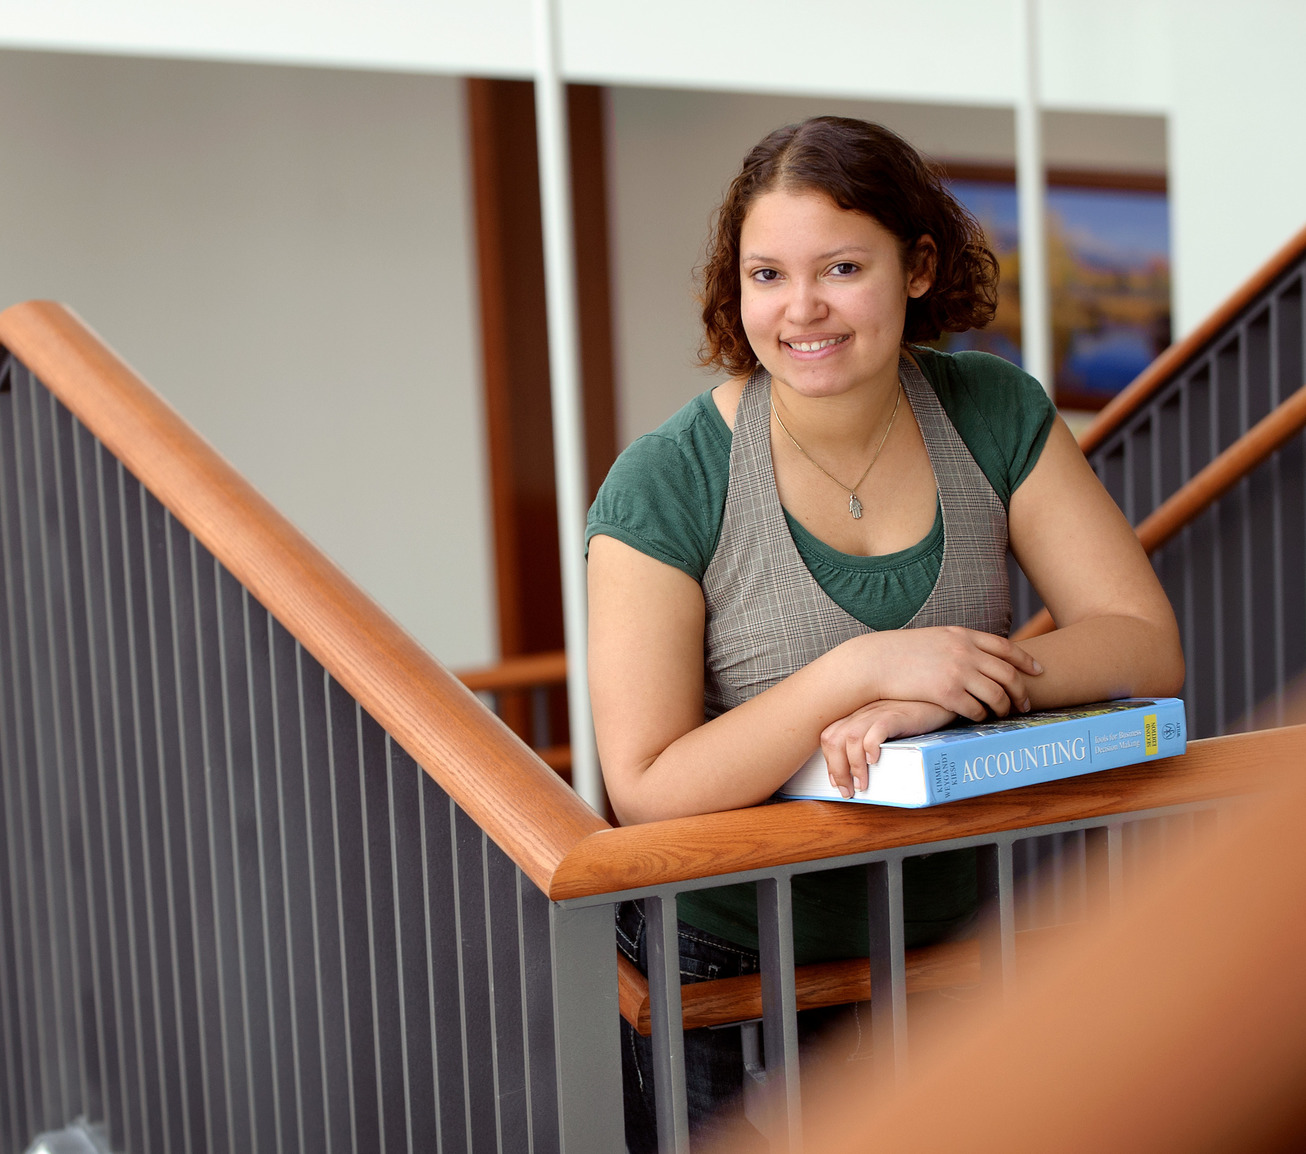 A student holds a book in a stairwell looking at the camera